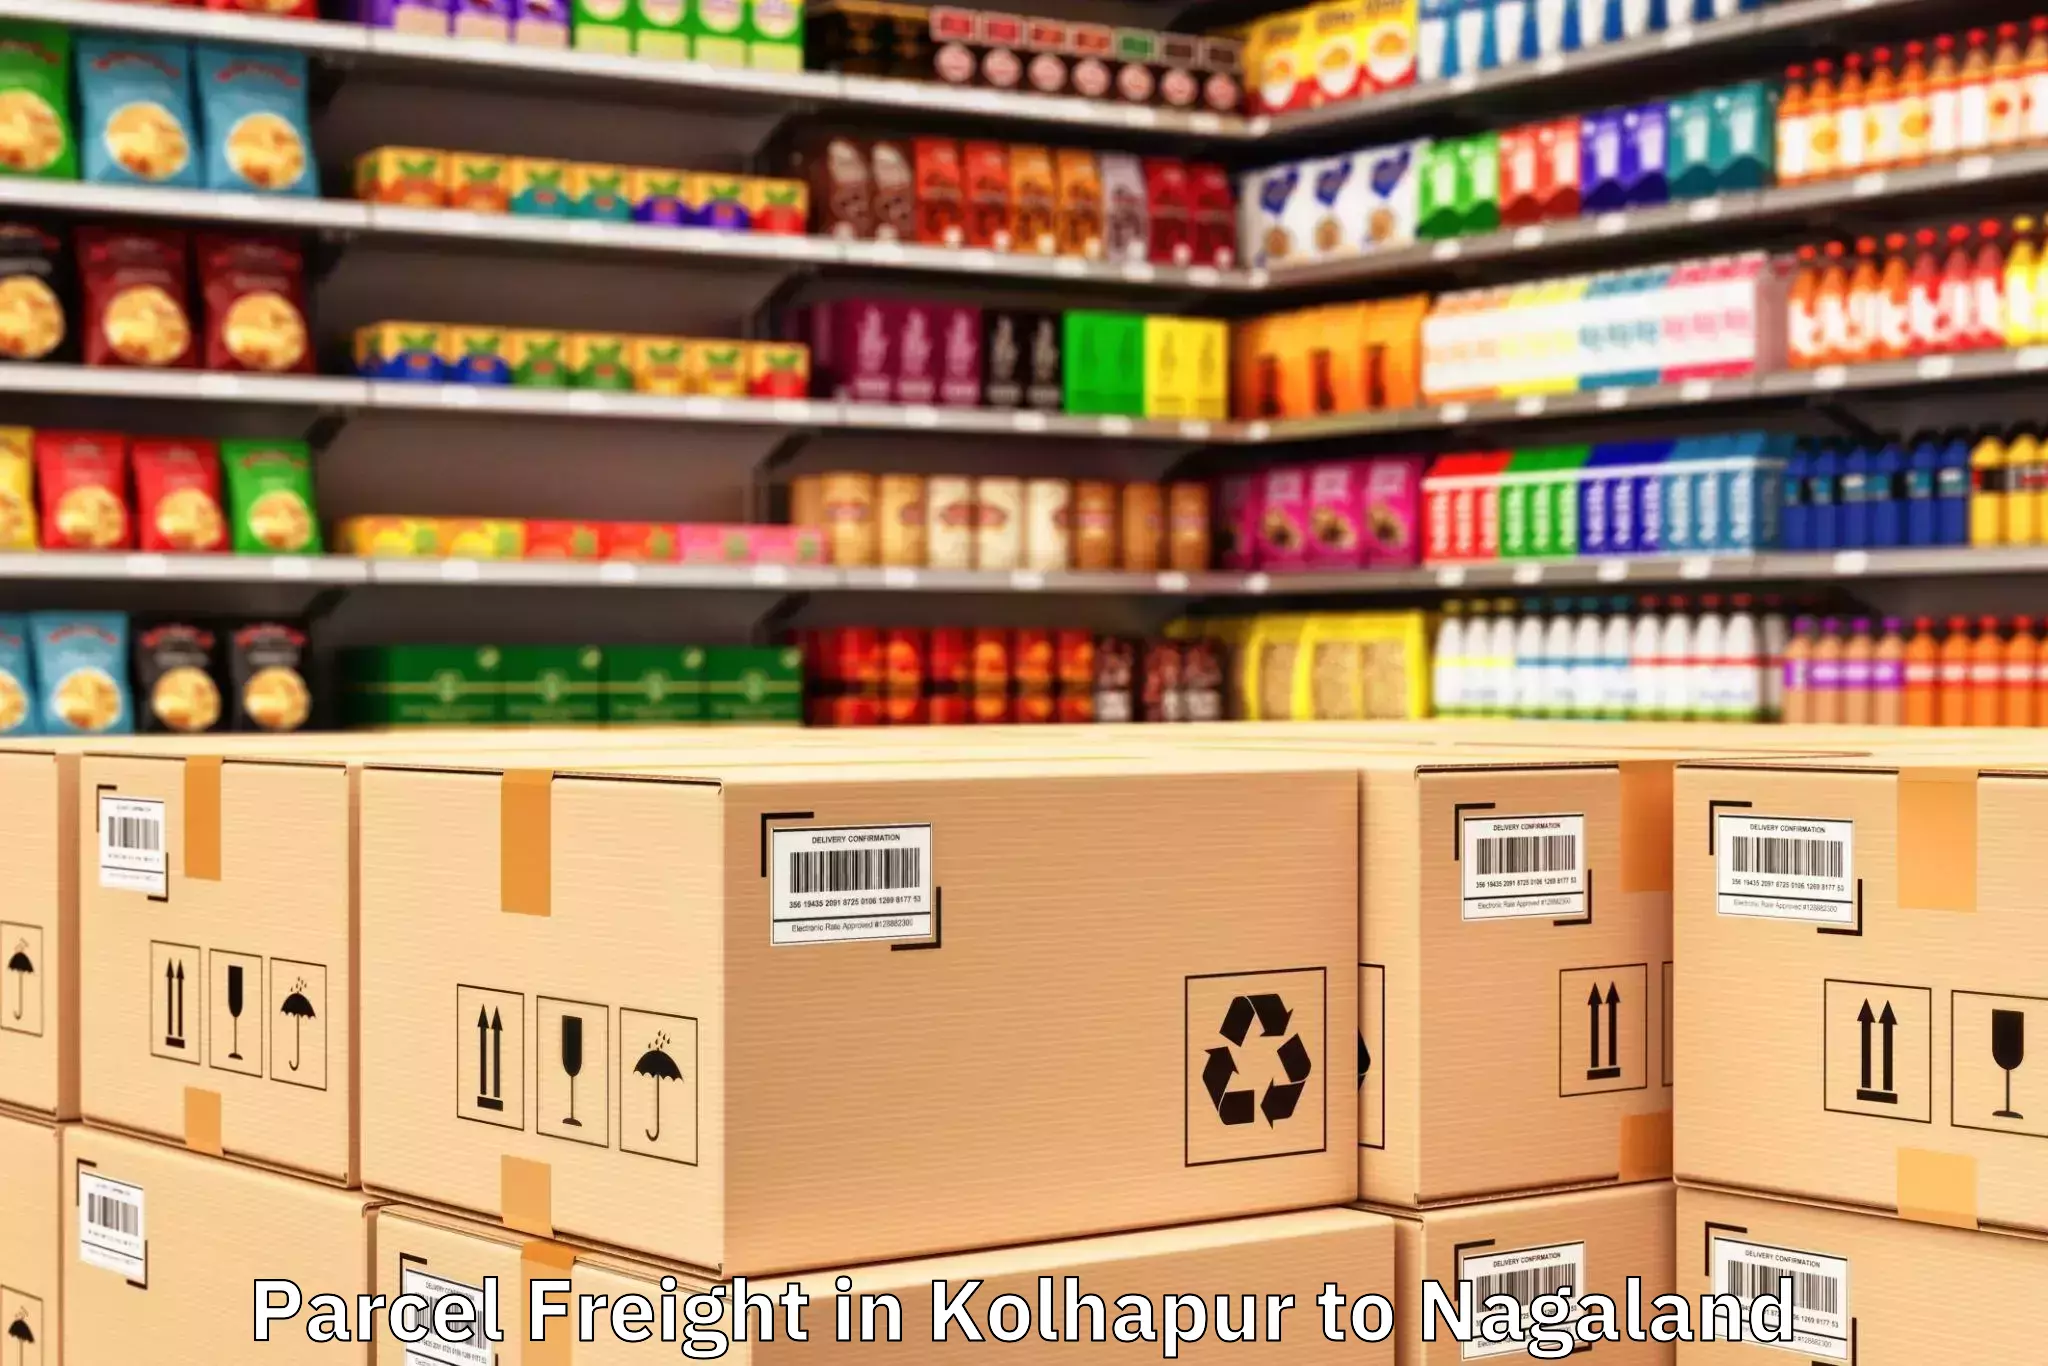 Top Kolhapur to Kubolong Parcel Freight Available